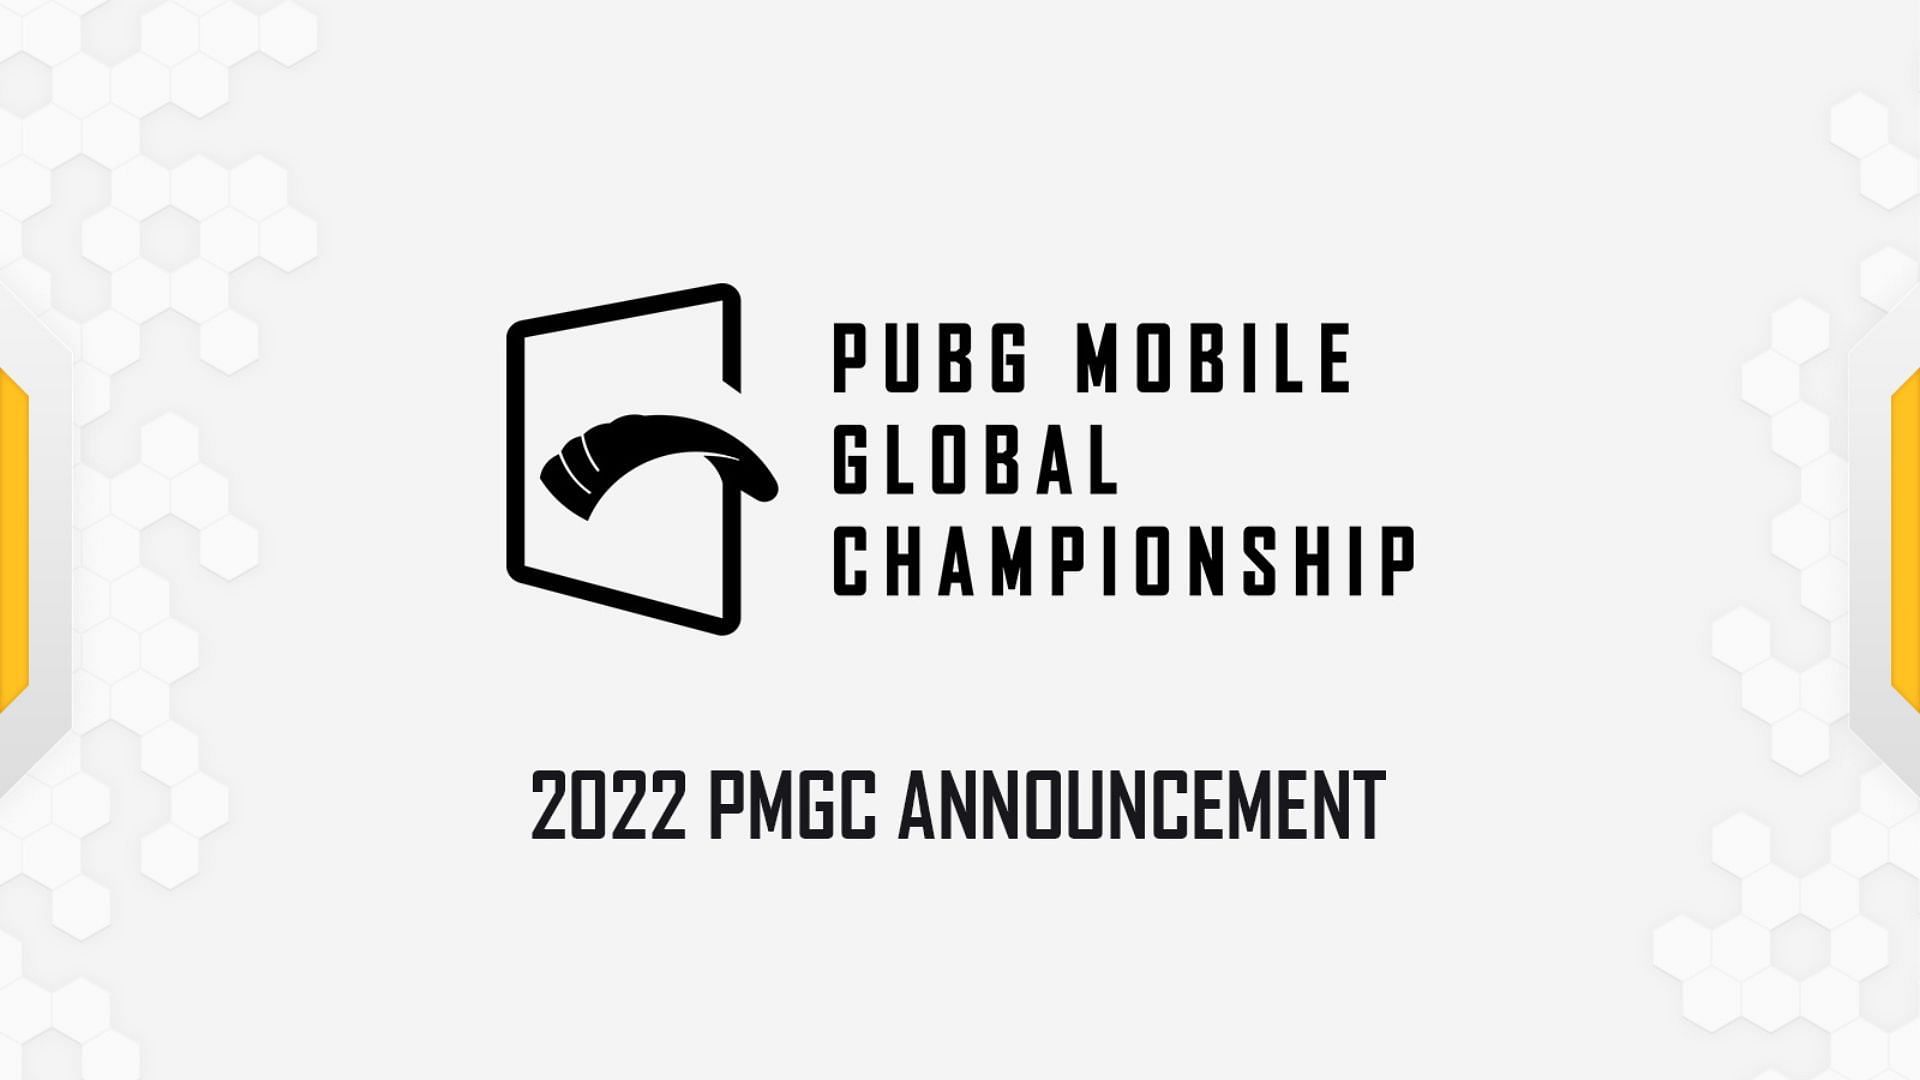 PUBG Mobile Global Championship 2022 features a total of 51 teams (Image via Tencent)